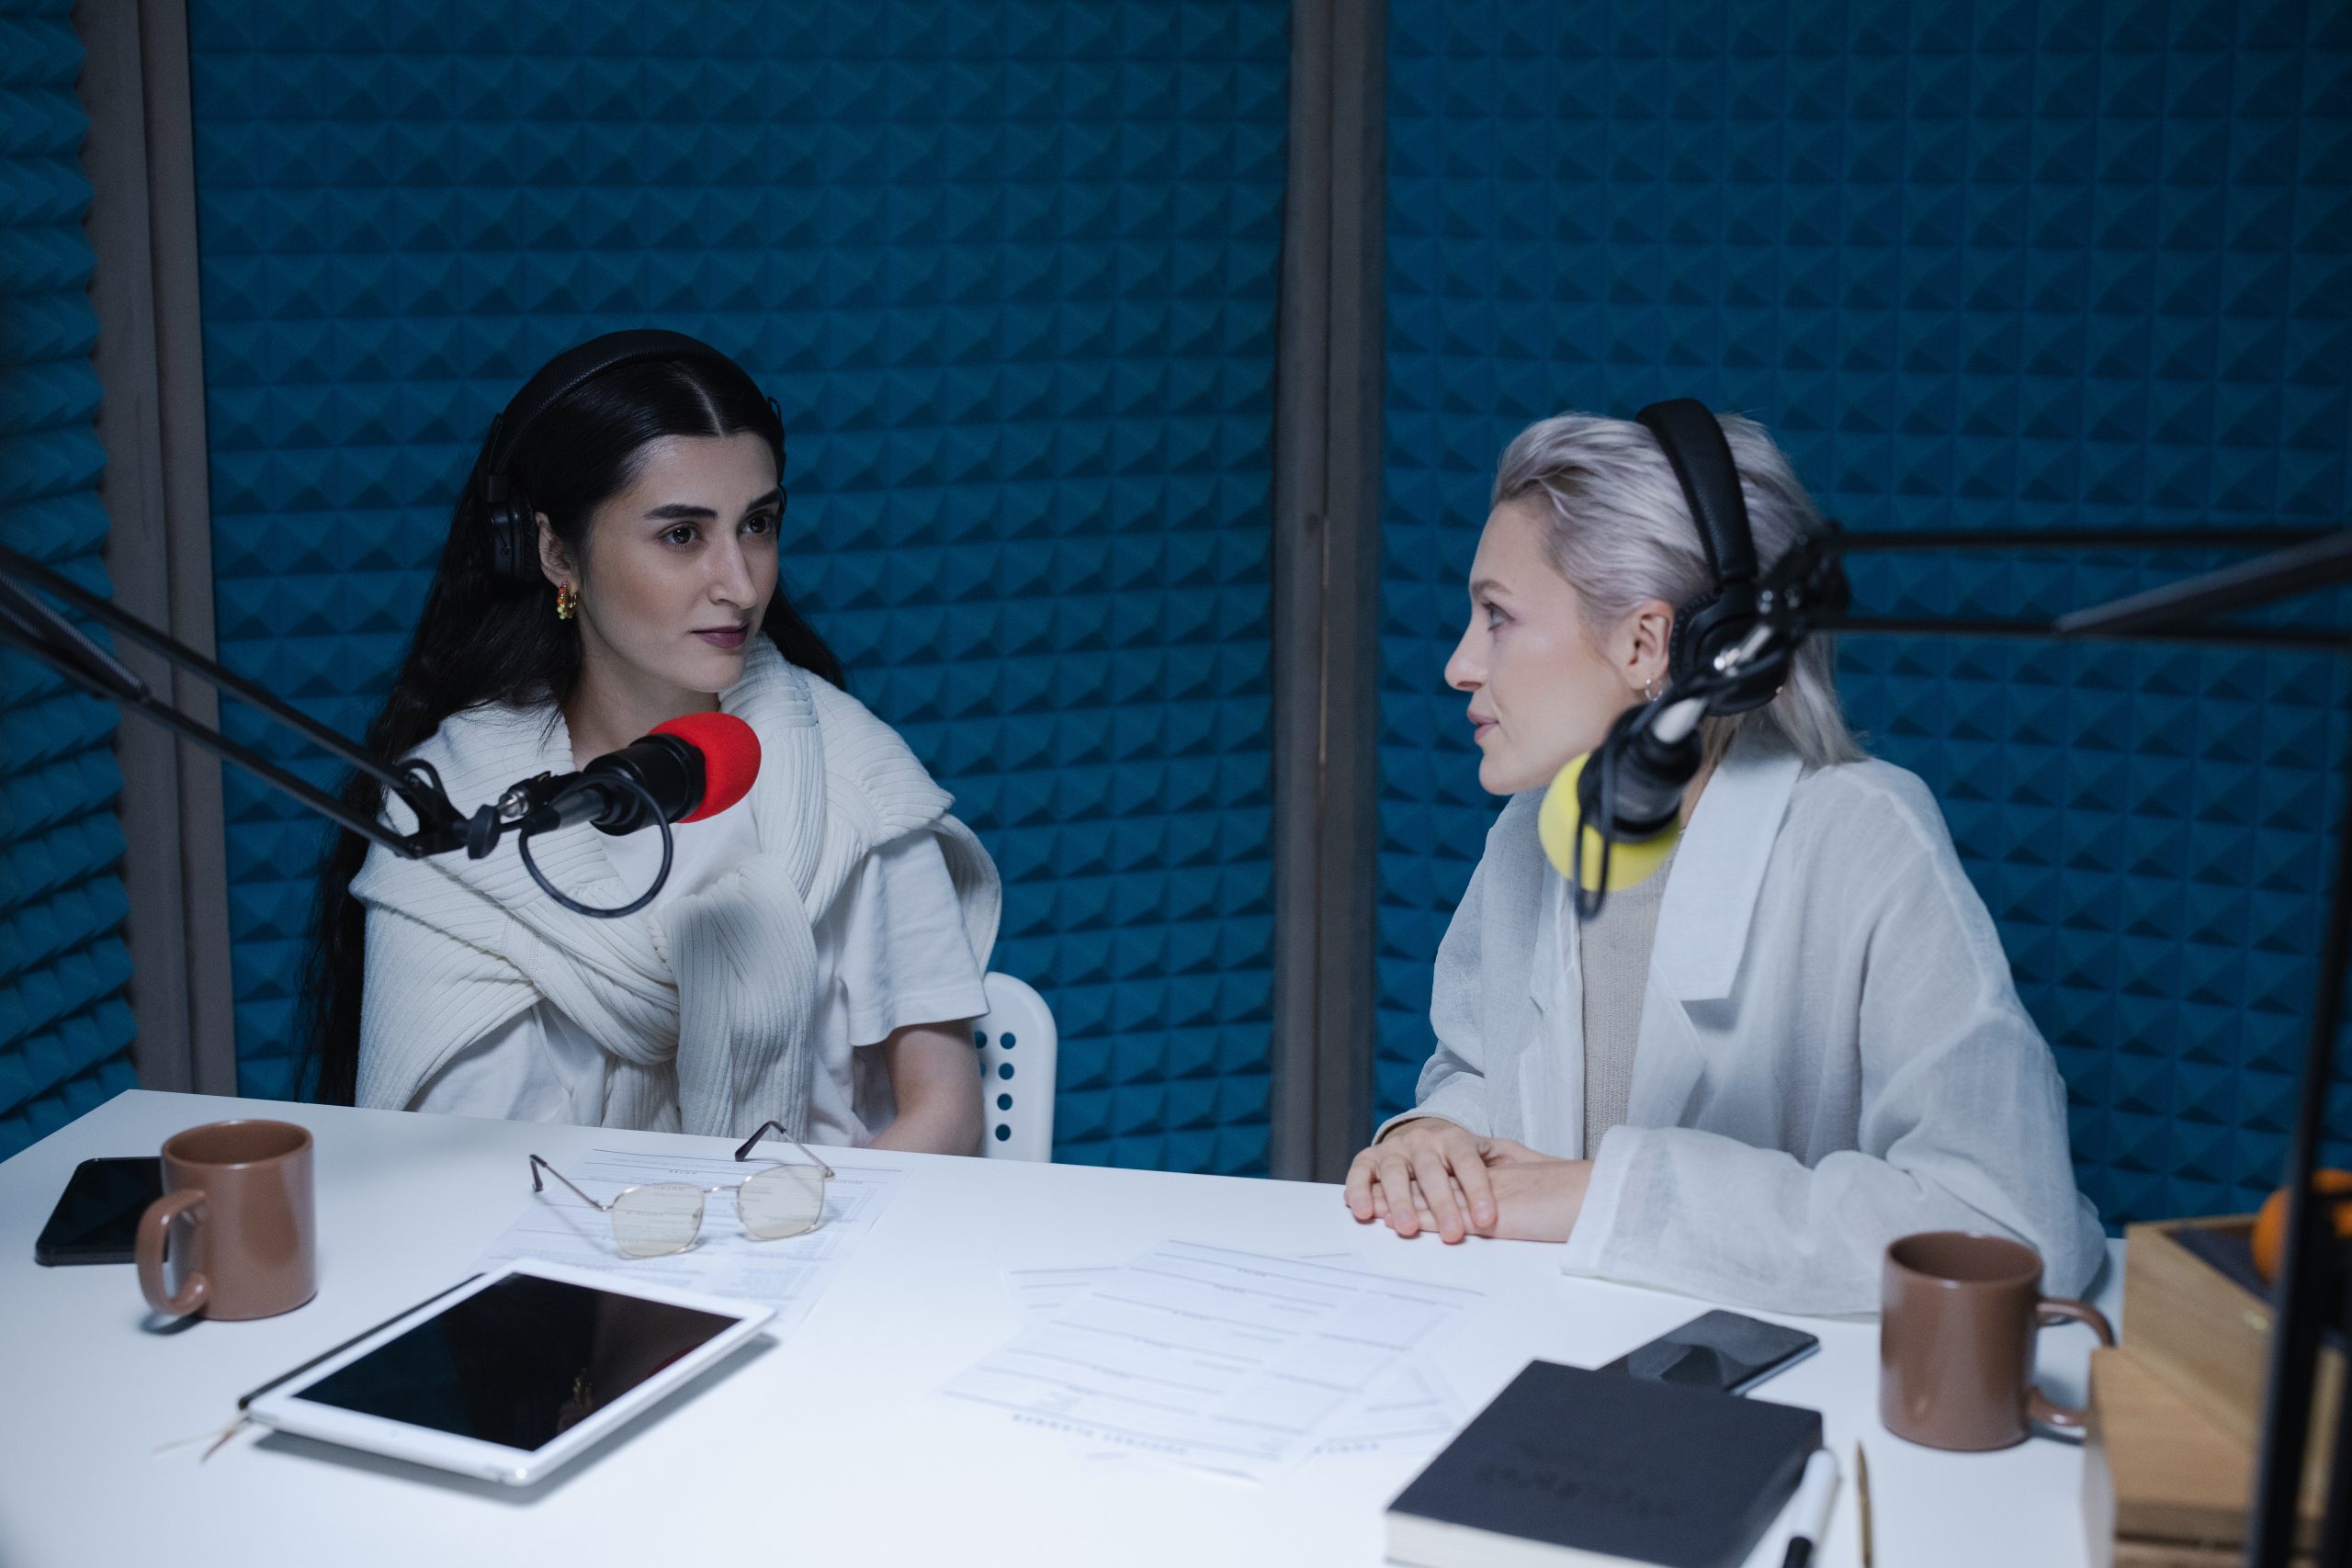 Two women recording a video podcast, in a studio with sound proofing on the walls